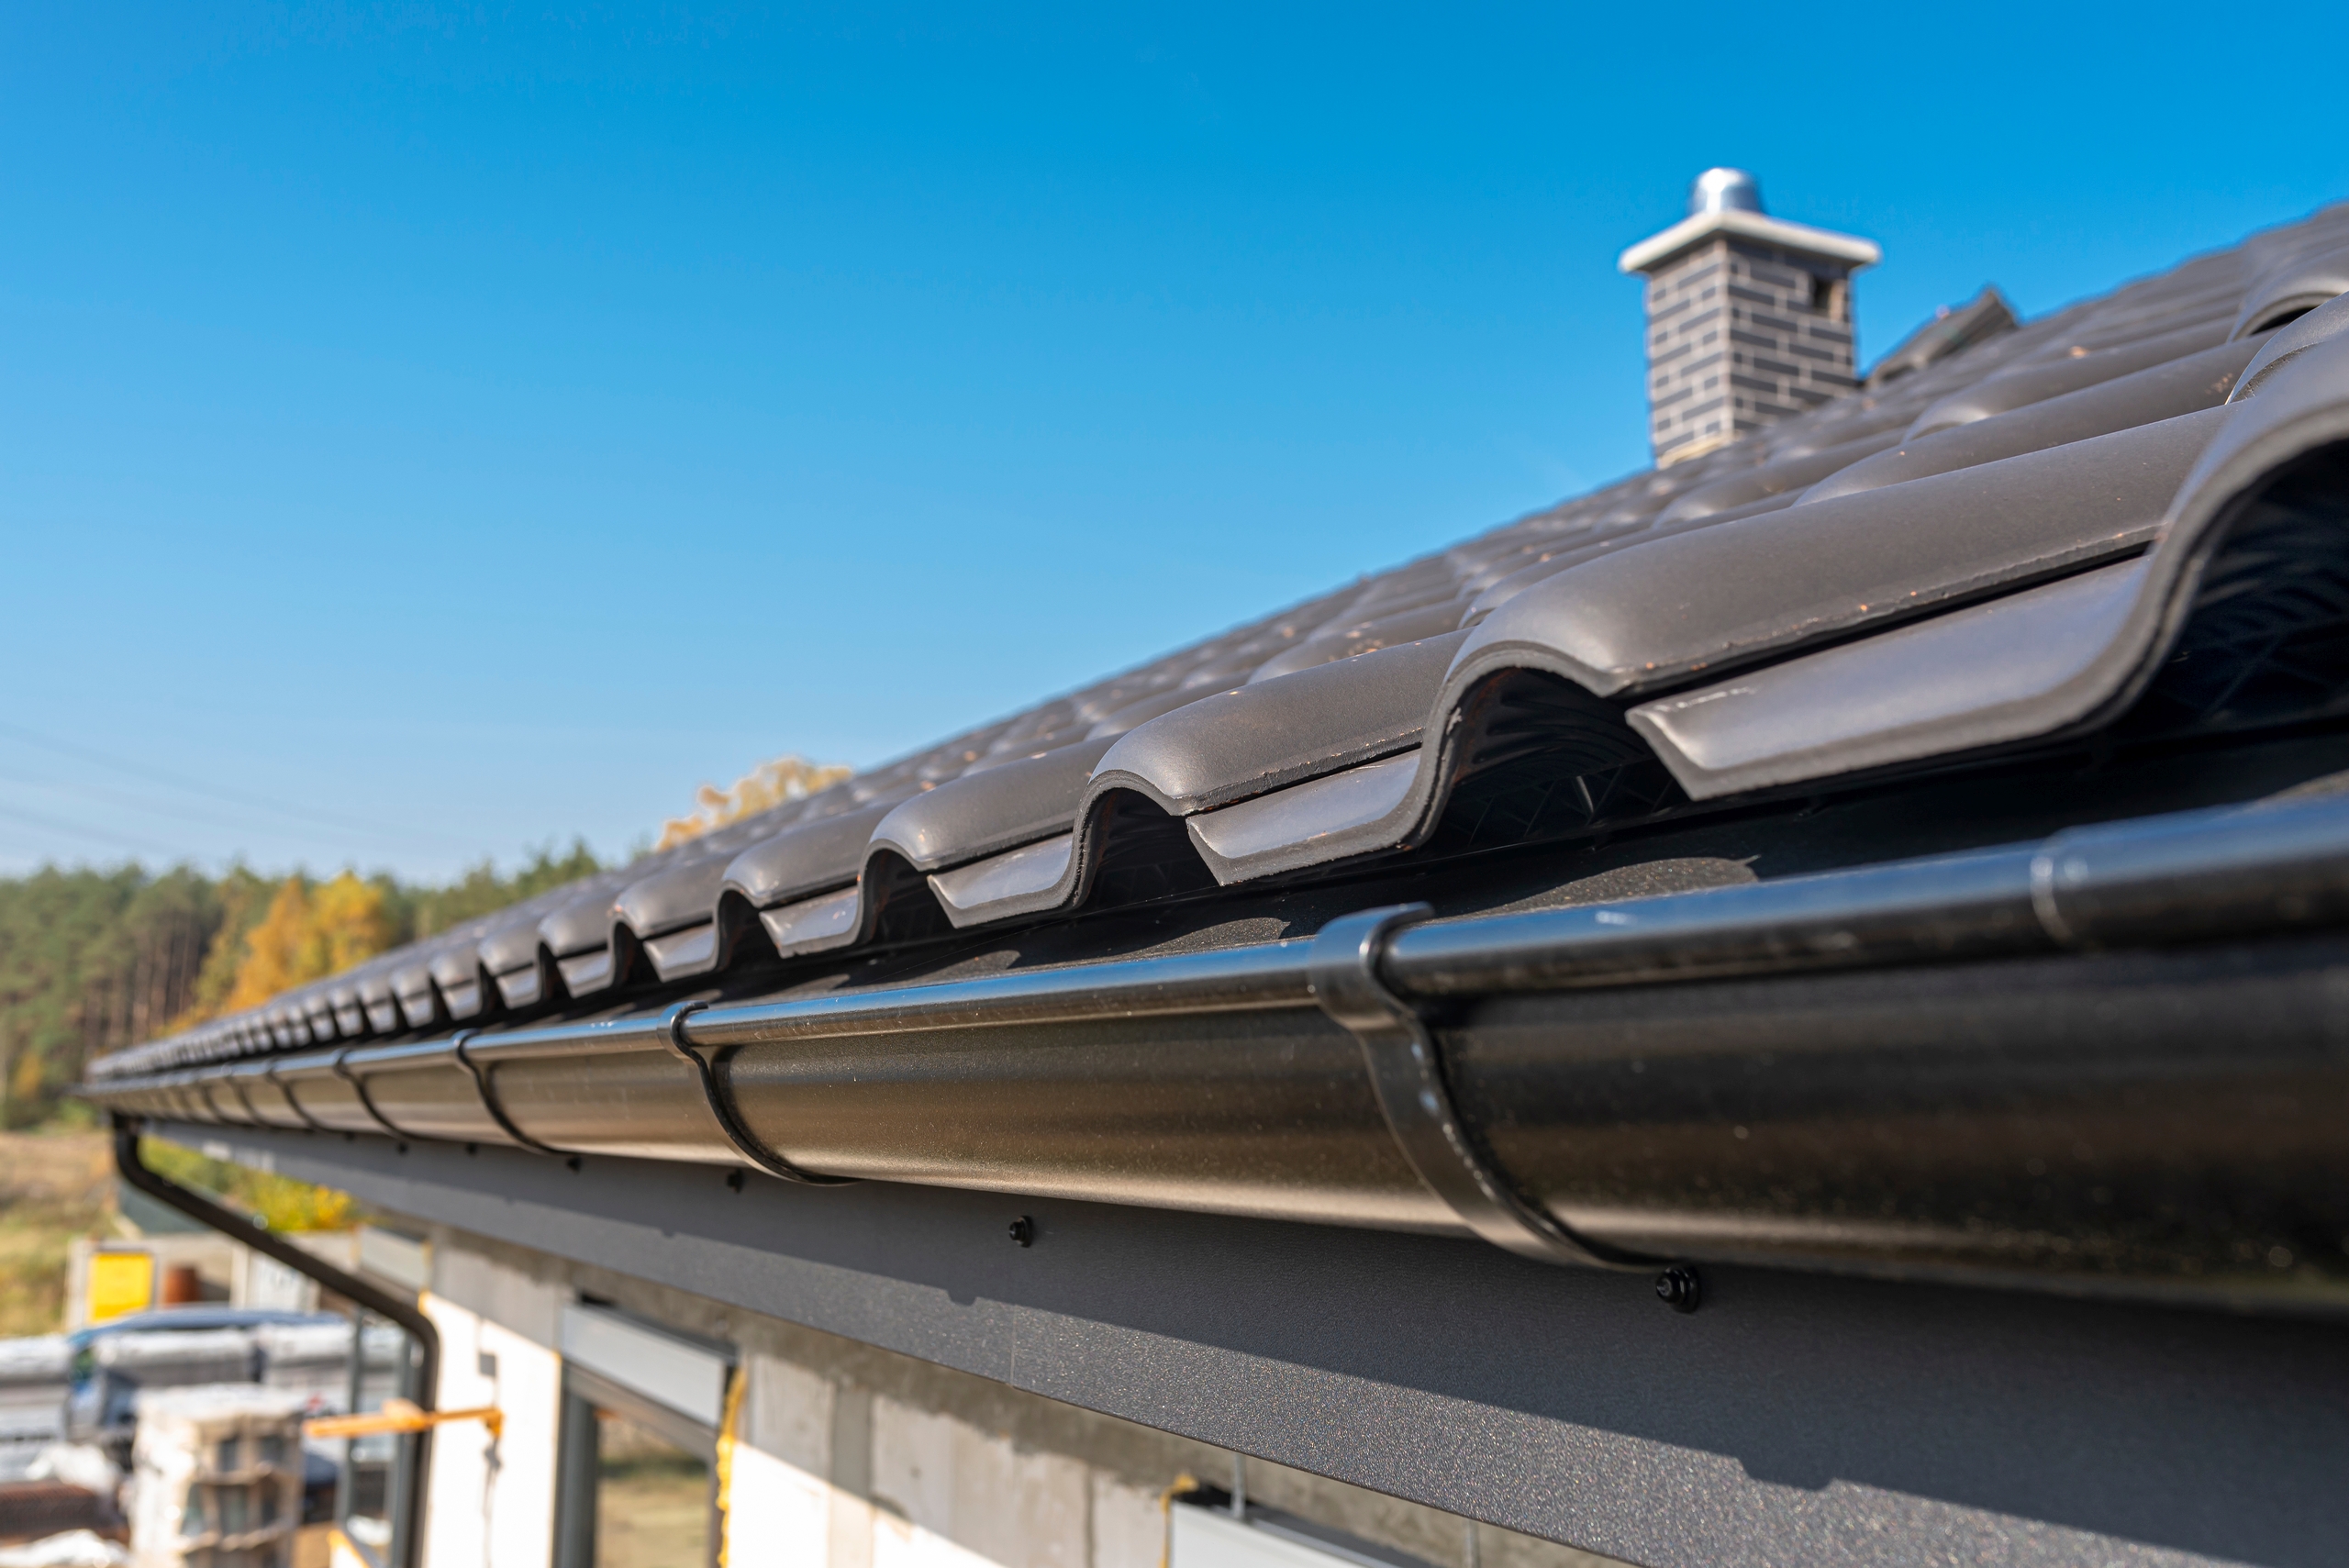 Gutter Guard Installation in West Chester, PA